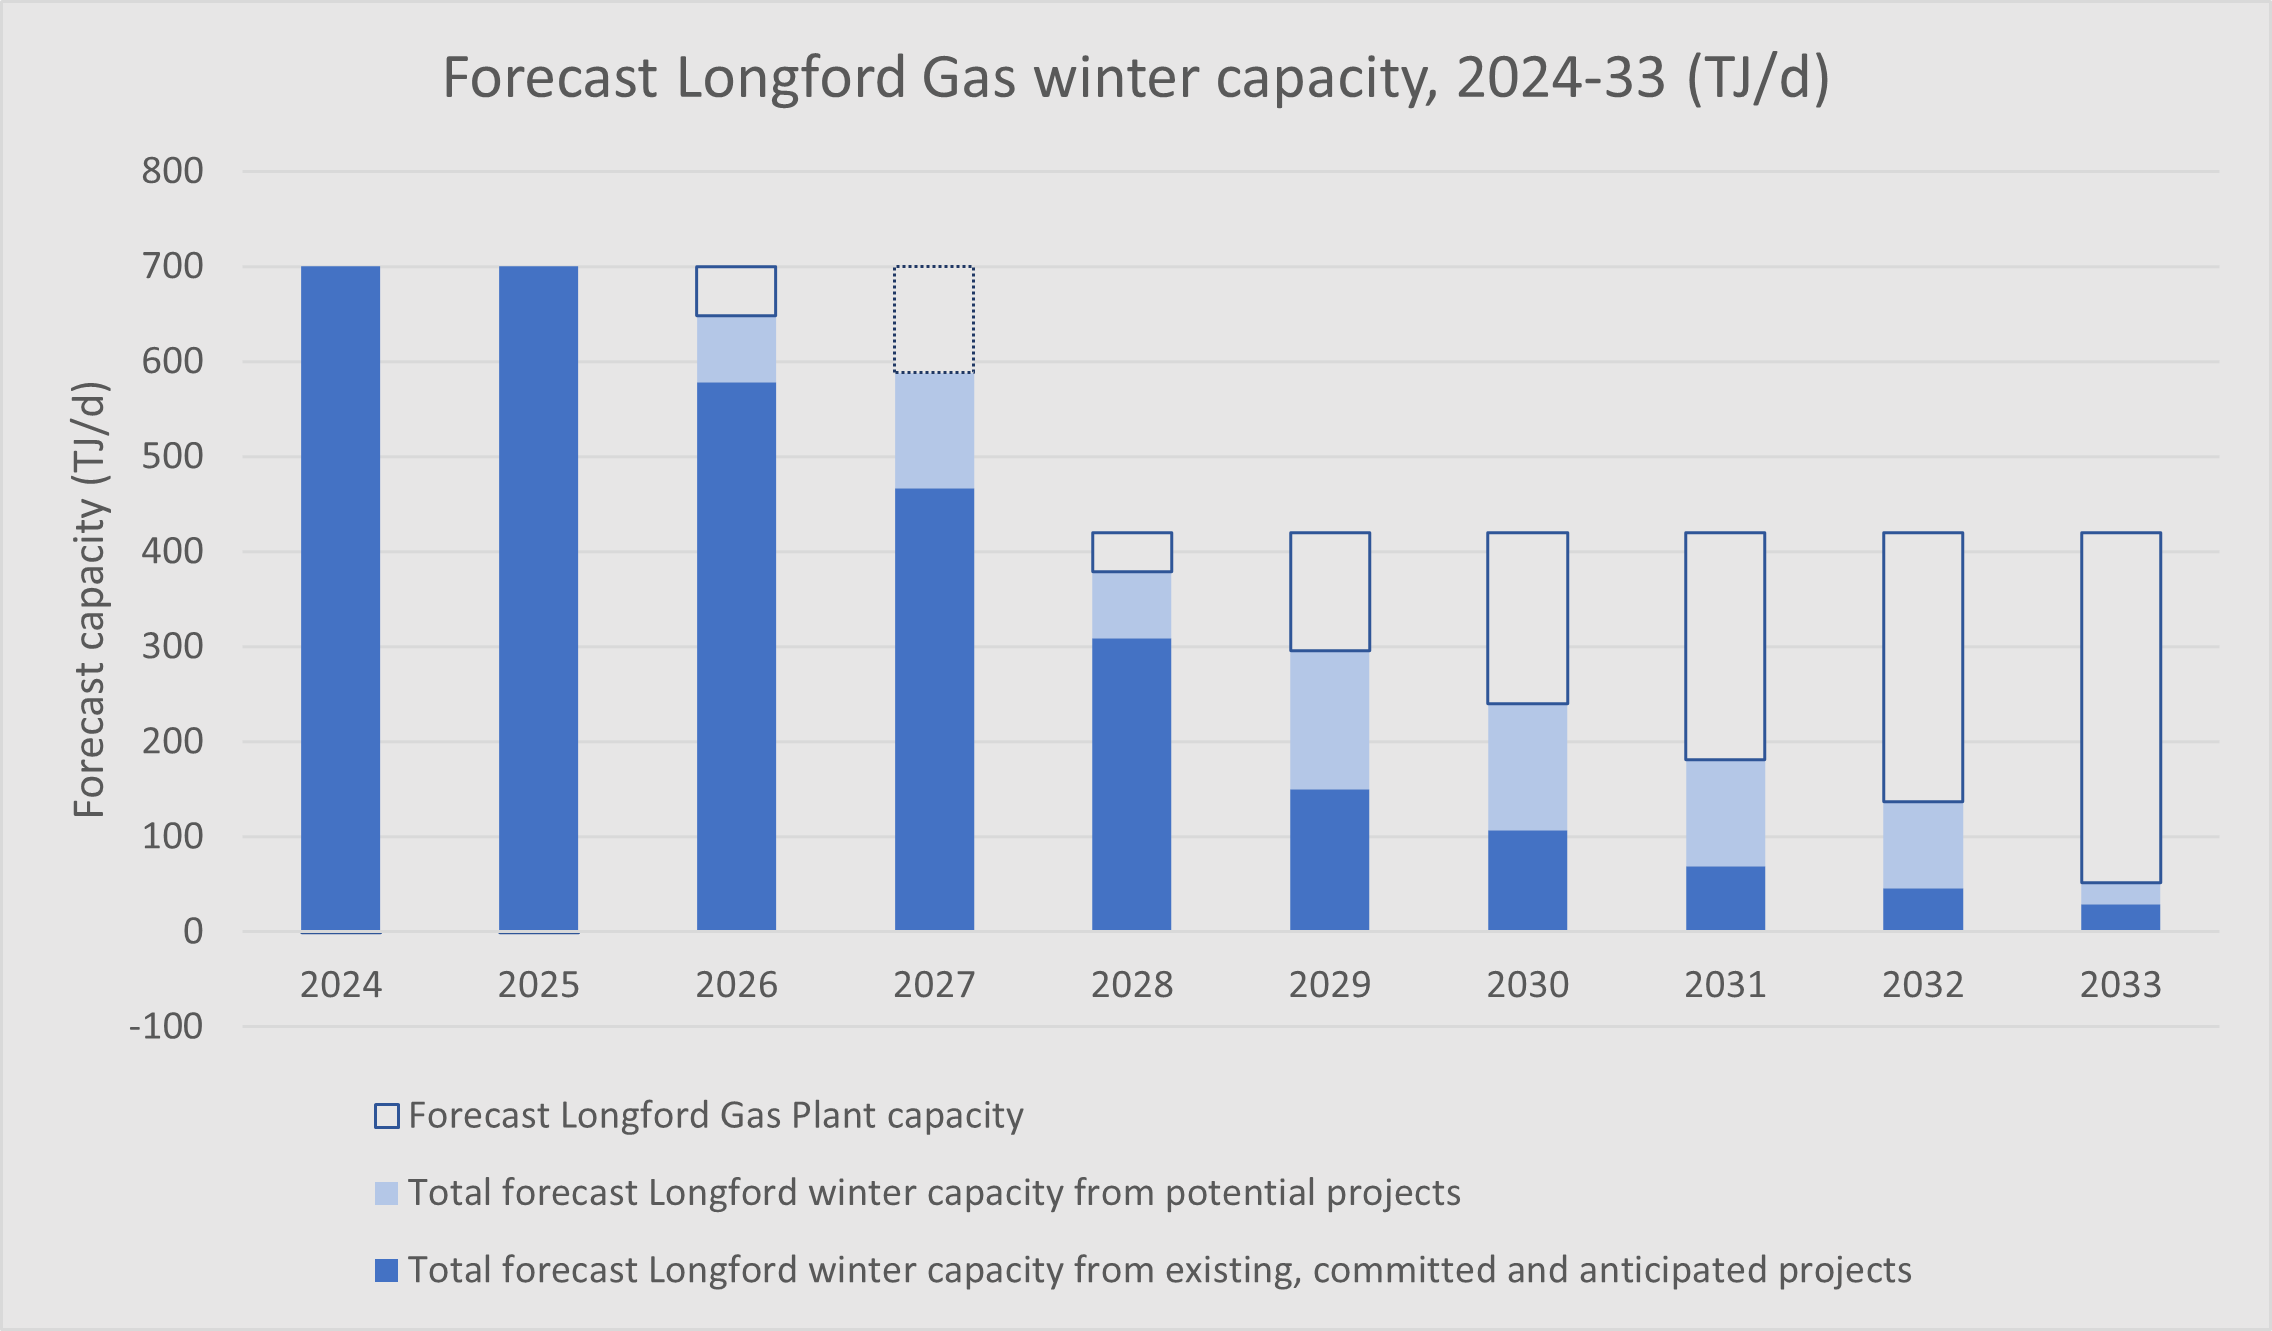 Bar graph showing dwindling gas supplies from the Longford plant in Victoria from 2028